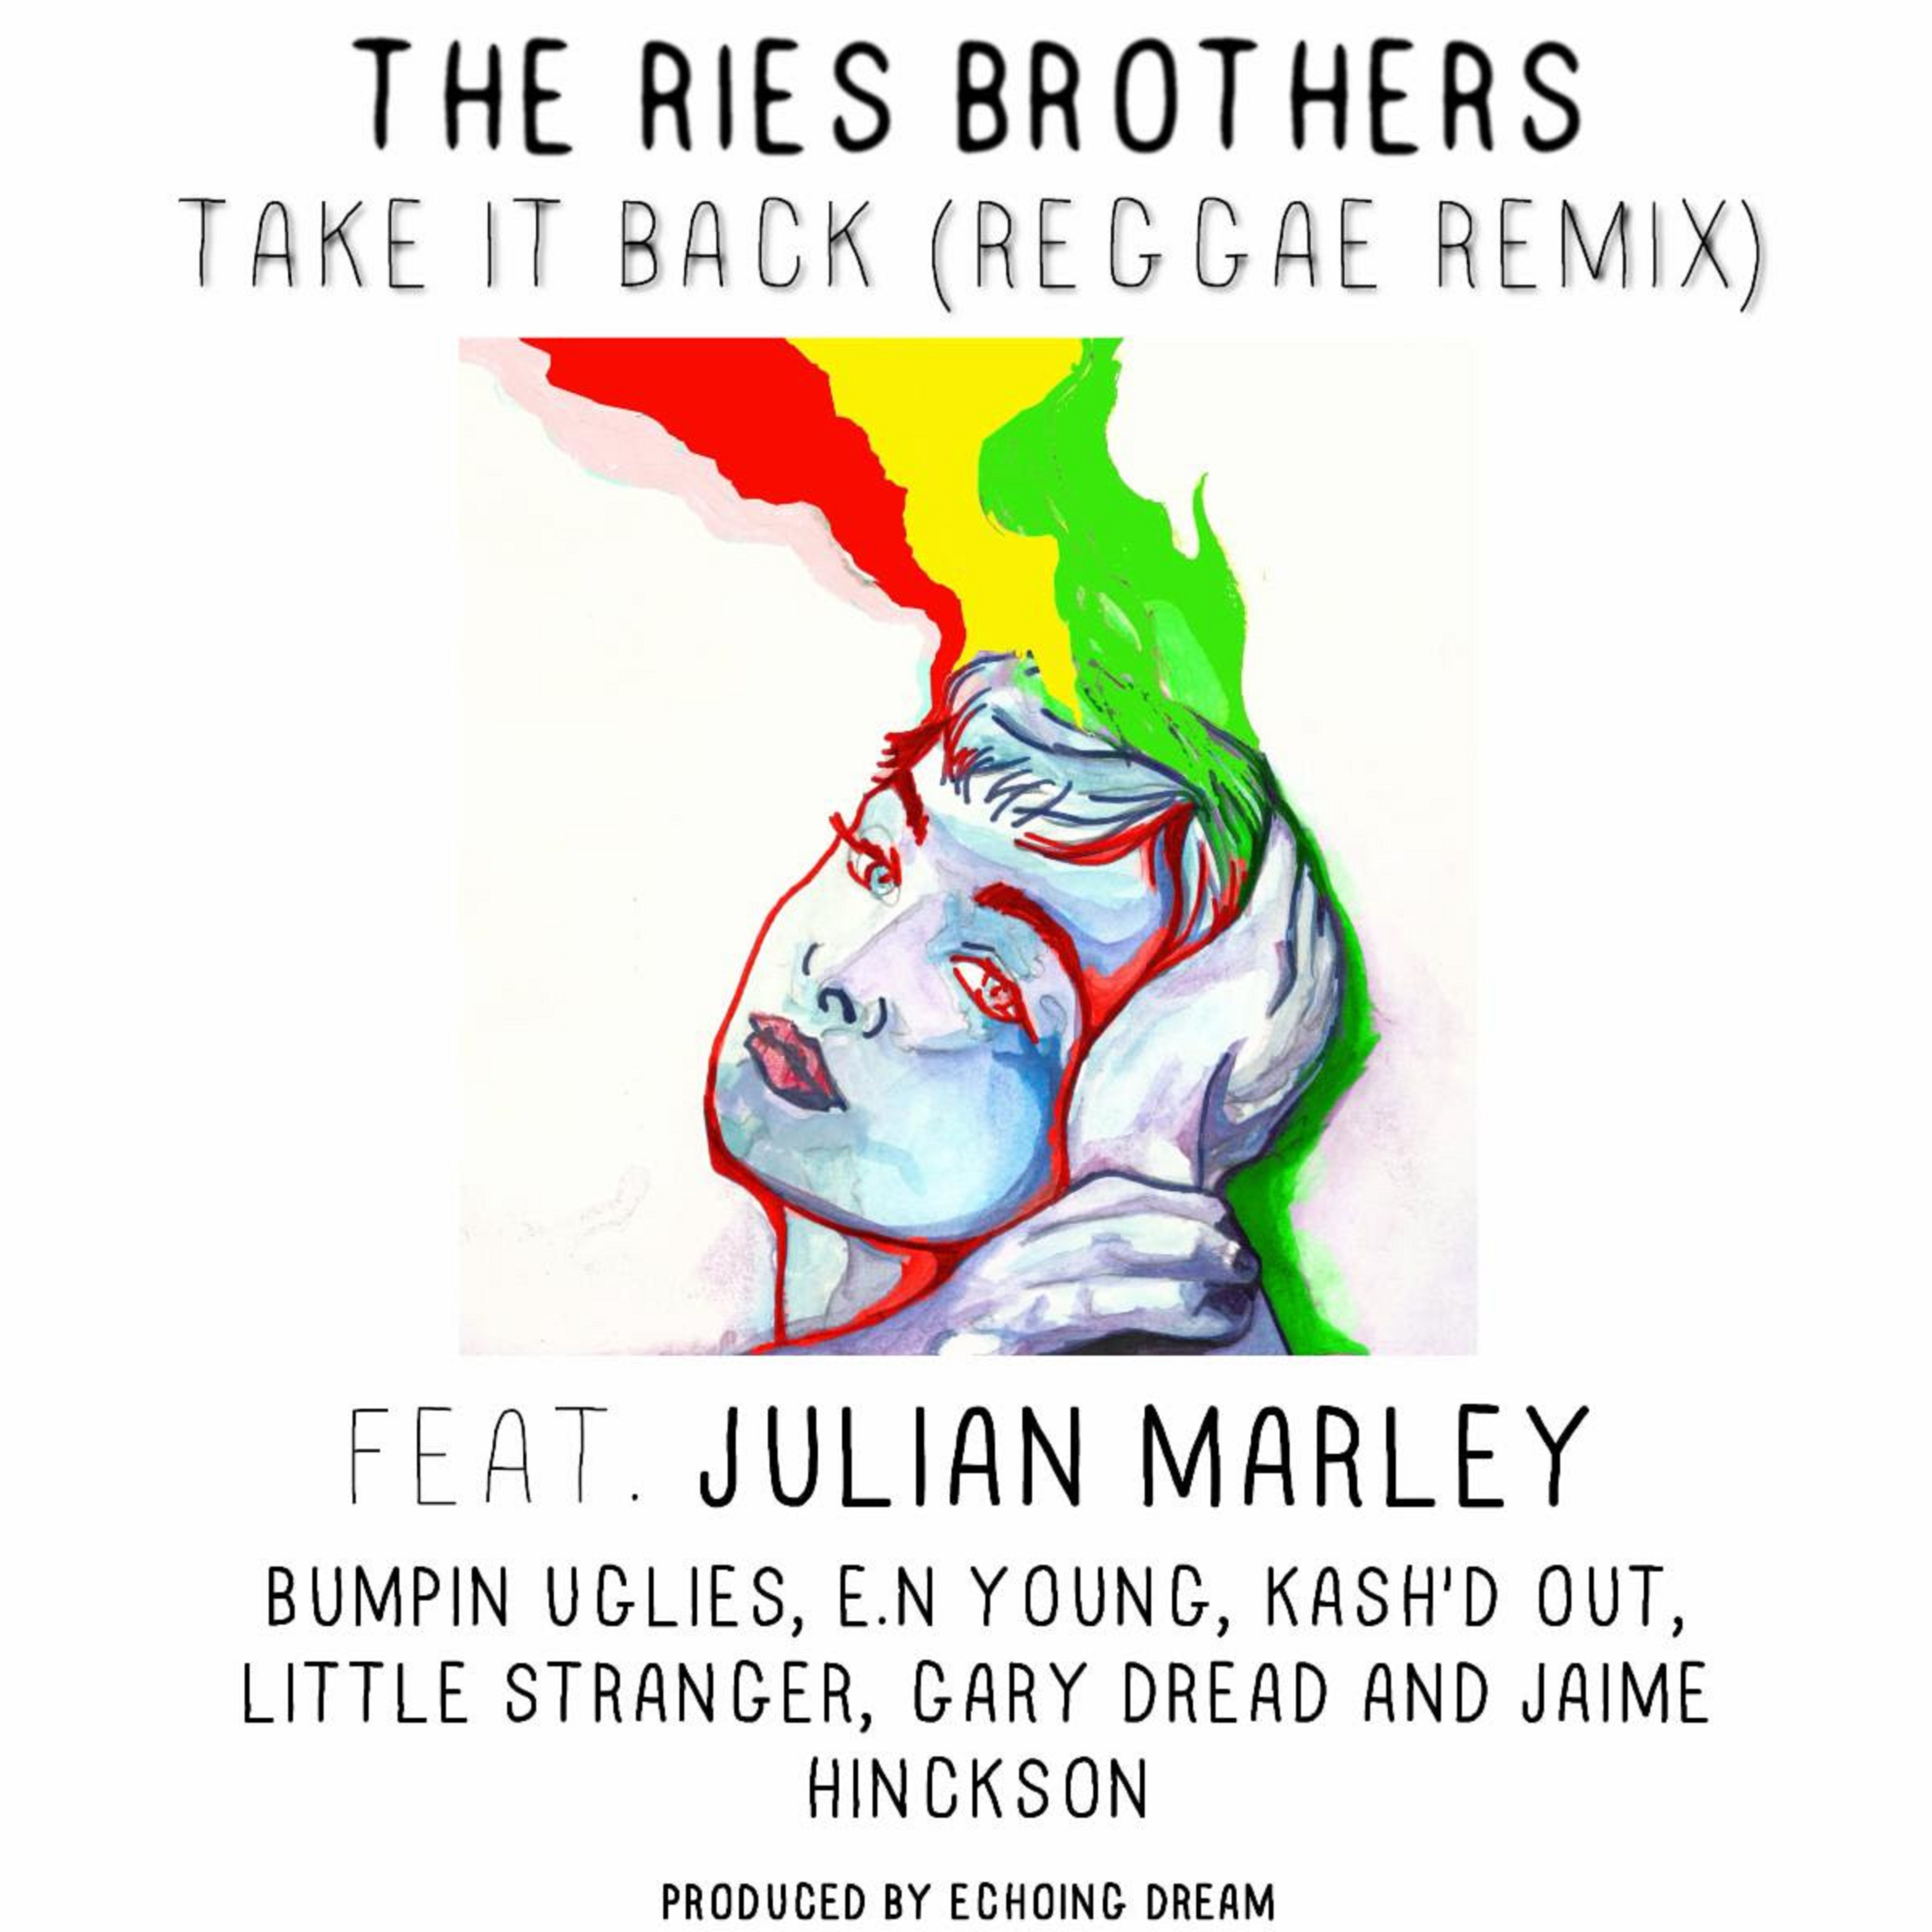 The Ries Brothers Release "Take It Back” Reggae Remix ft. Julian Marley & More, Out Now!